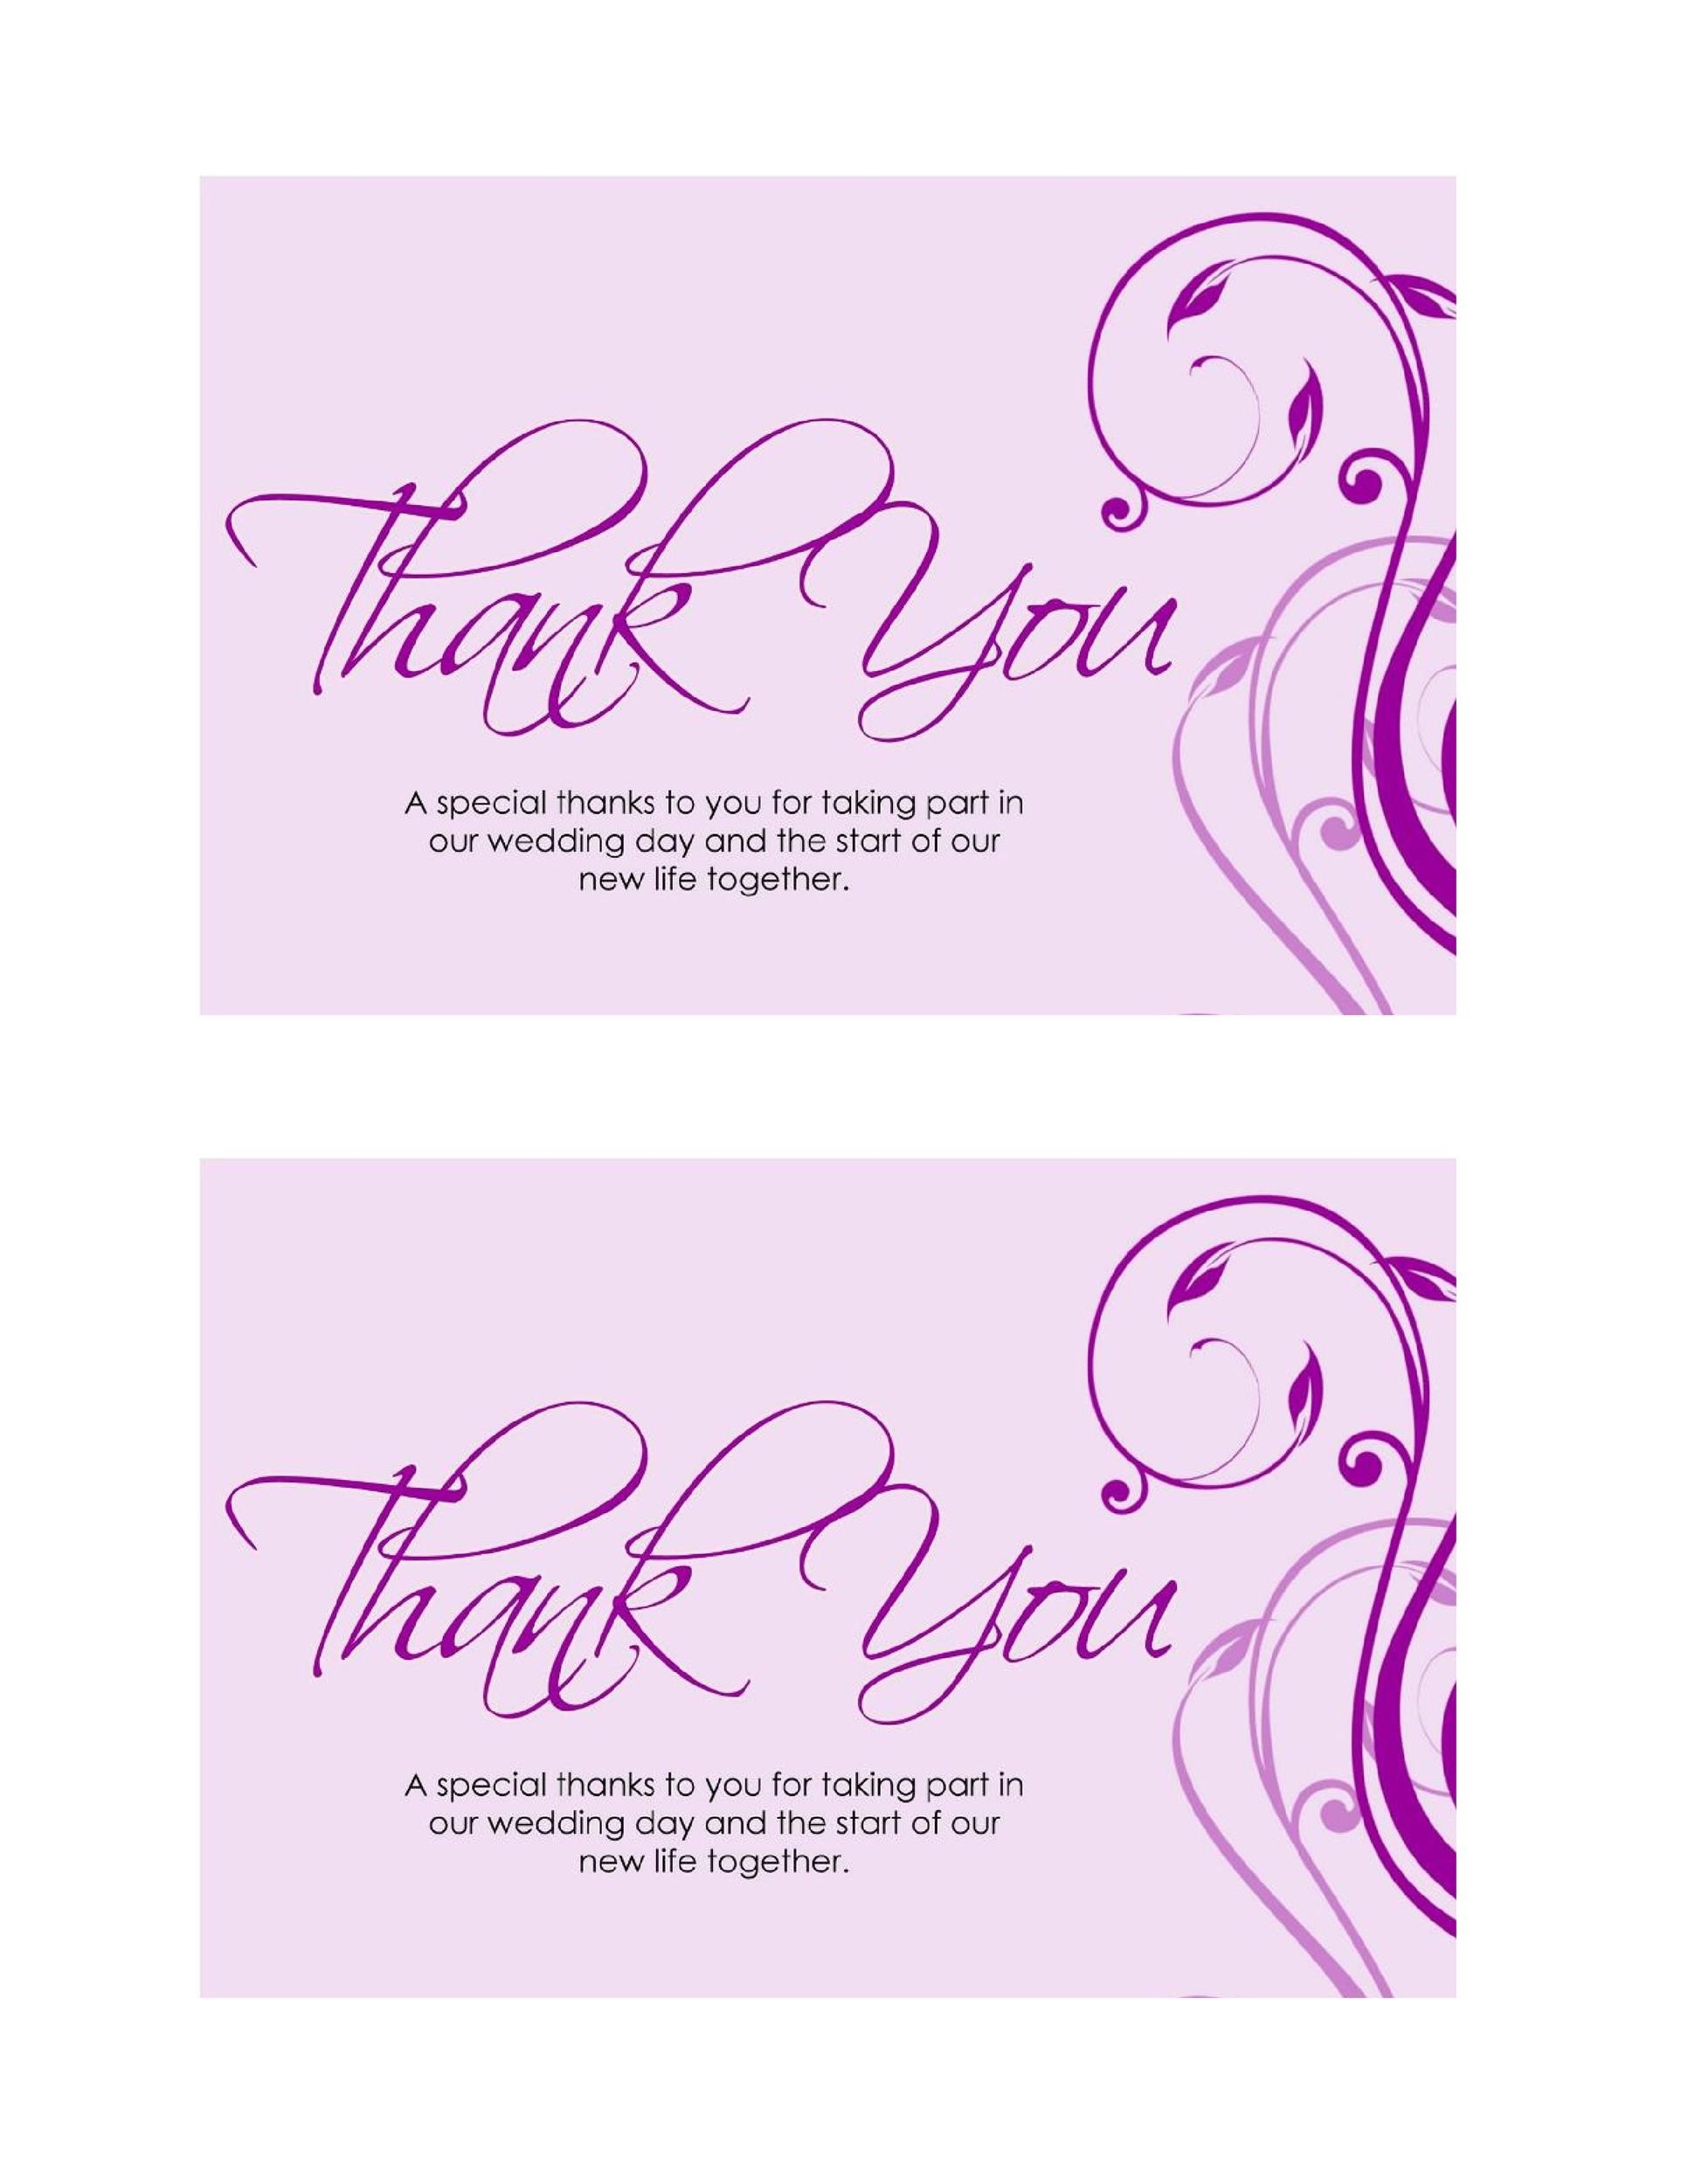 Thank You Card Templates 11+ Free Word, Excel & PDF Formats, Samples, Examples, Designs